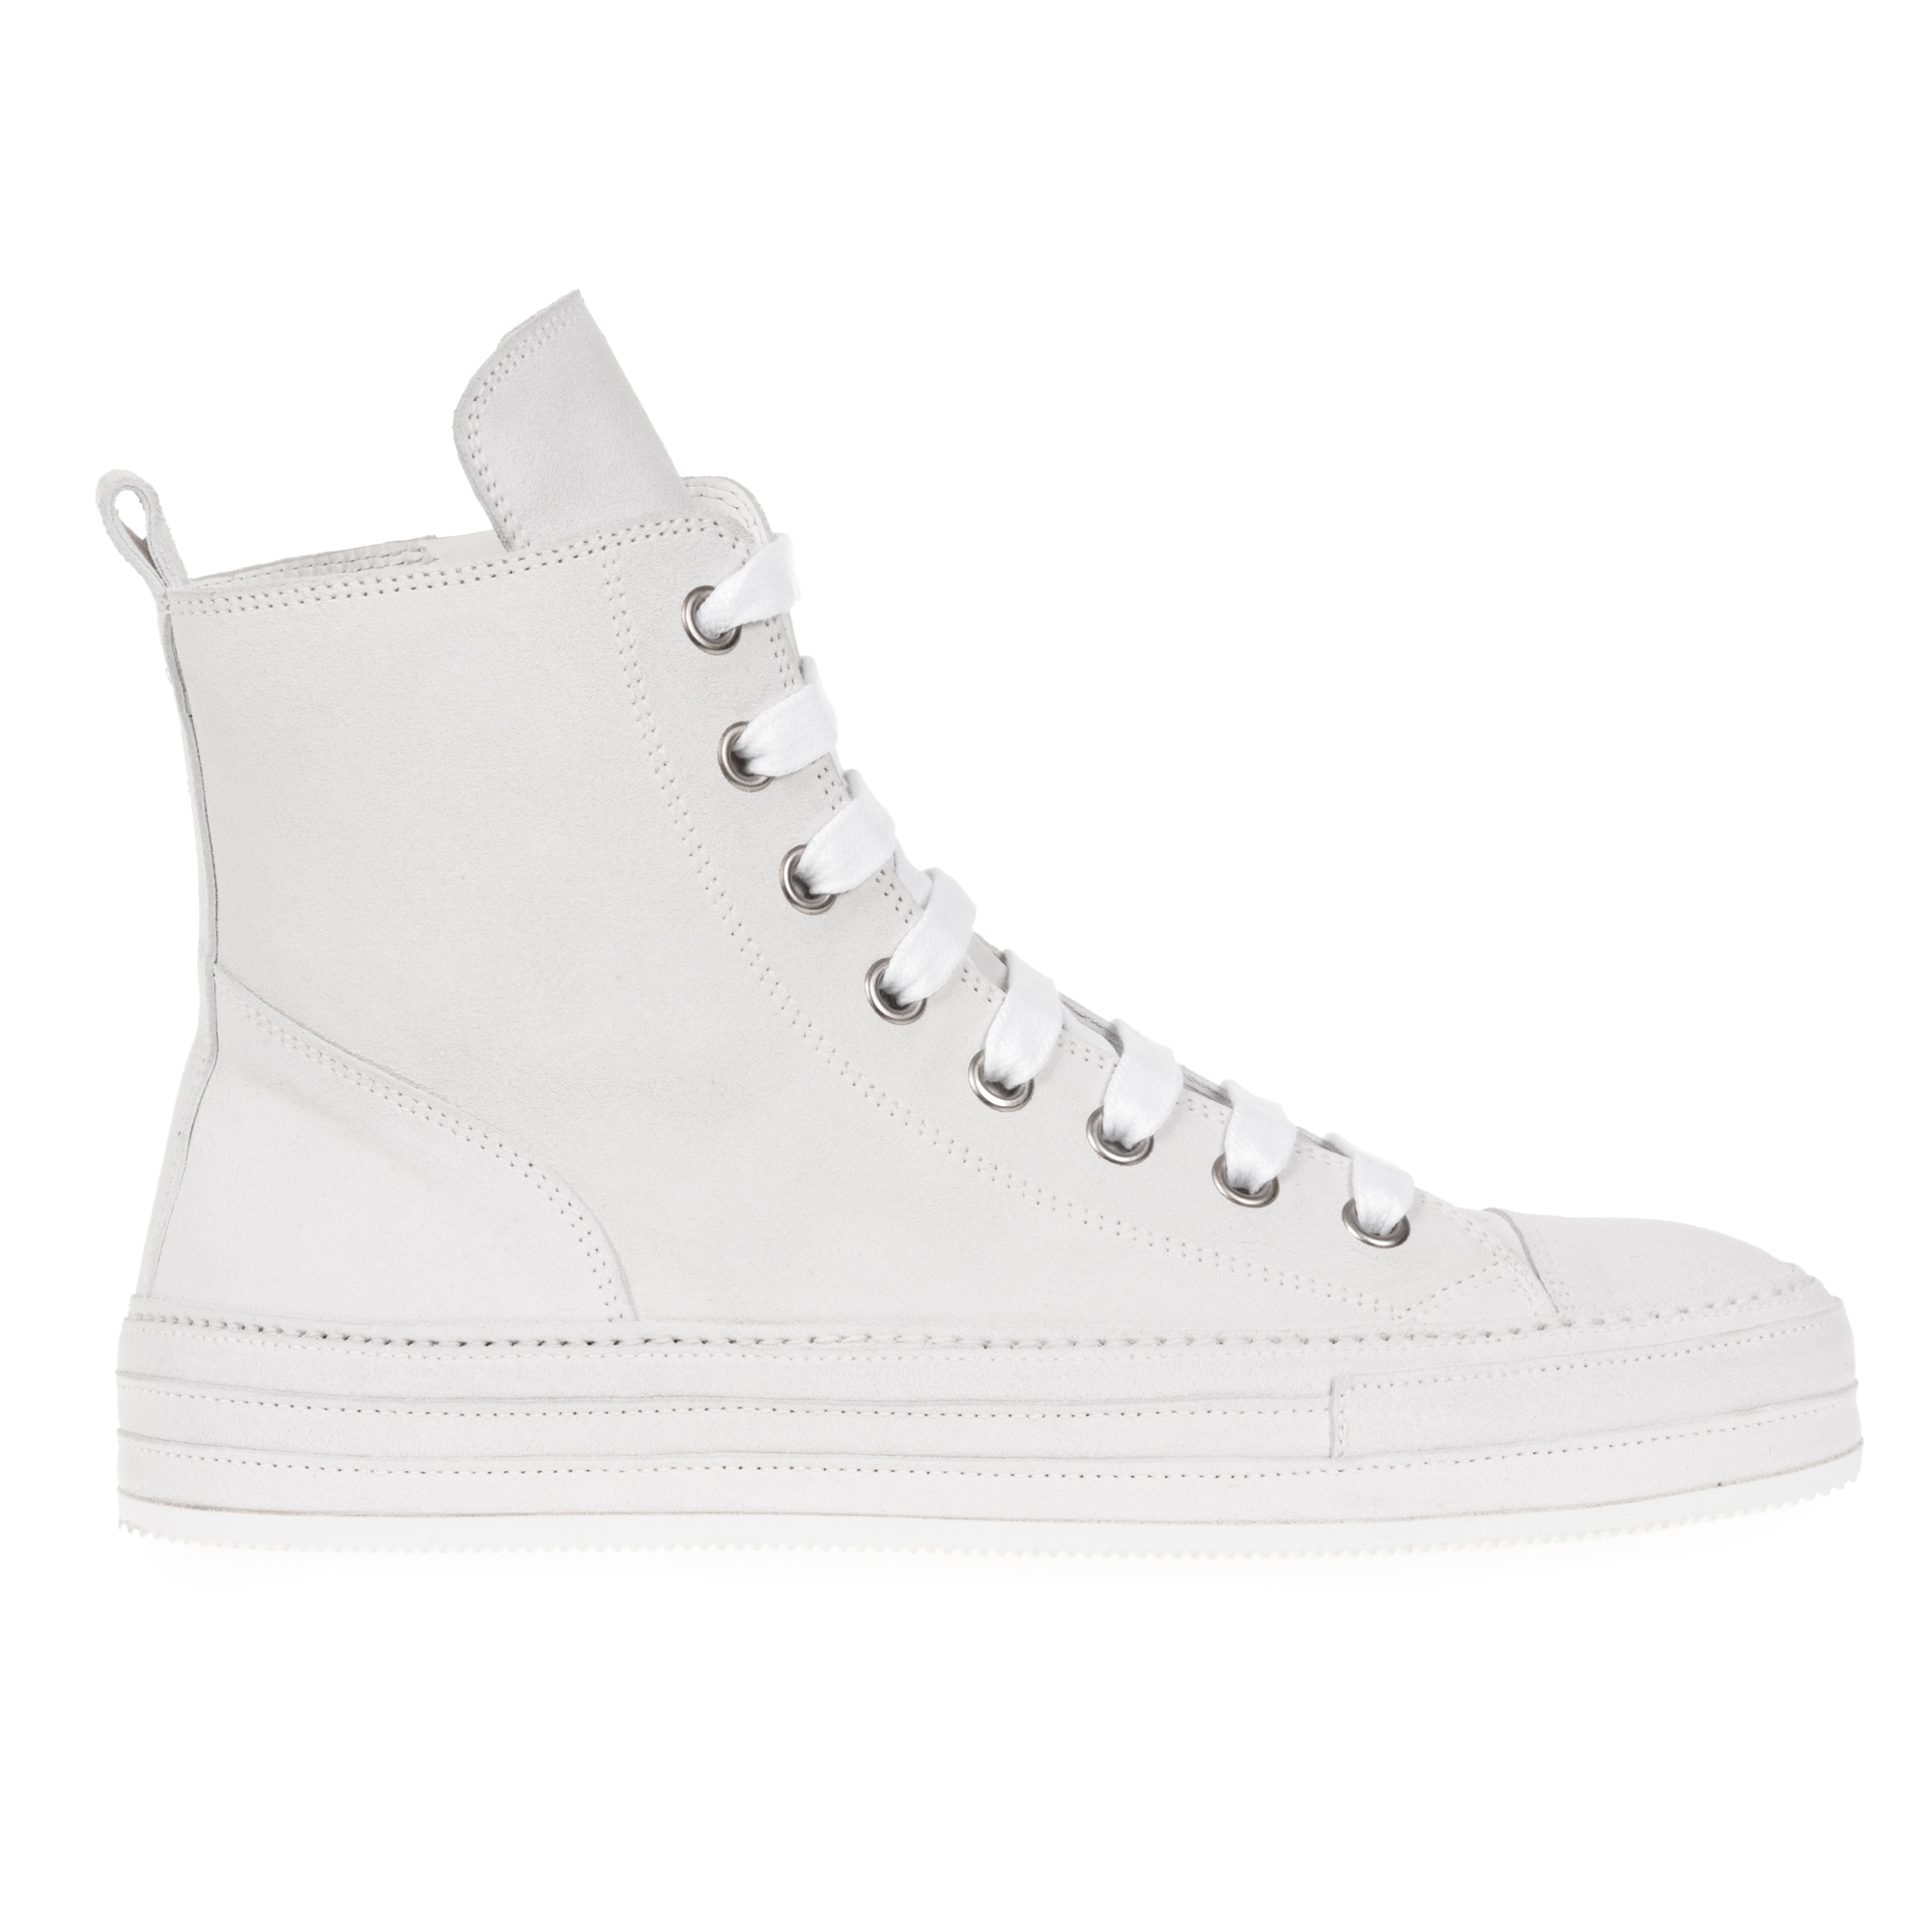 OFF WHITE LEATHER HIGH TOP SNEAKERS|wolfensson